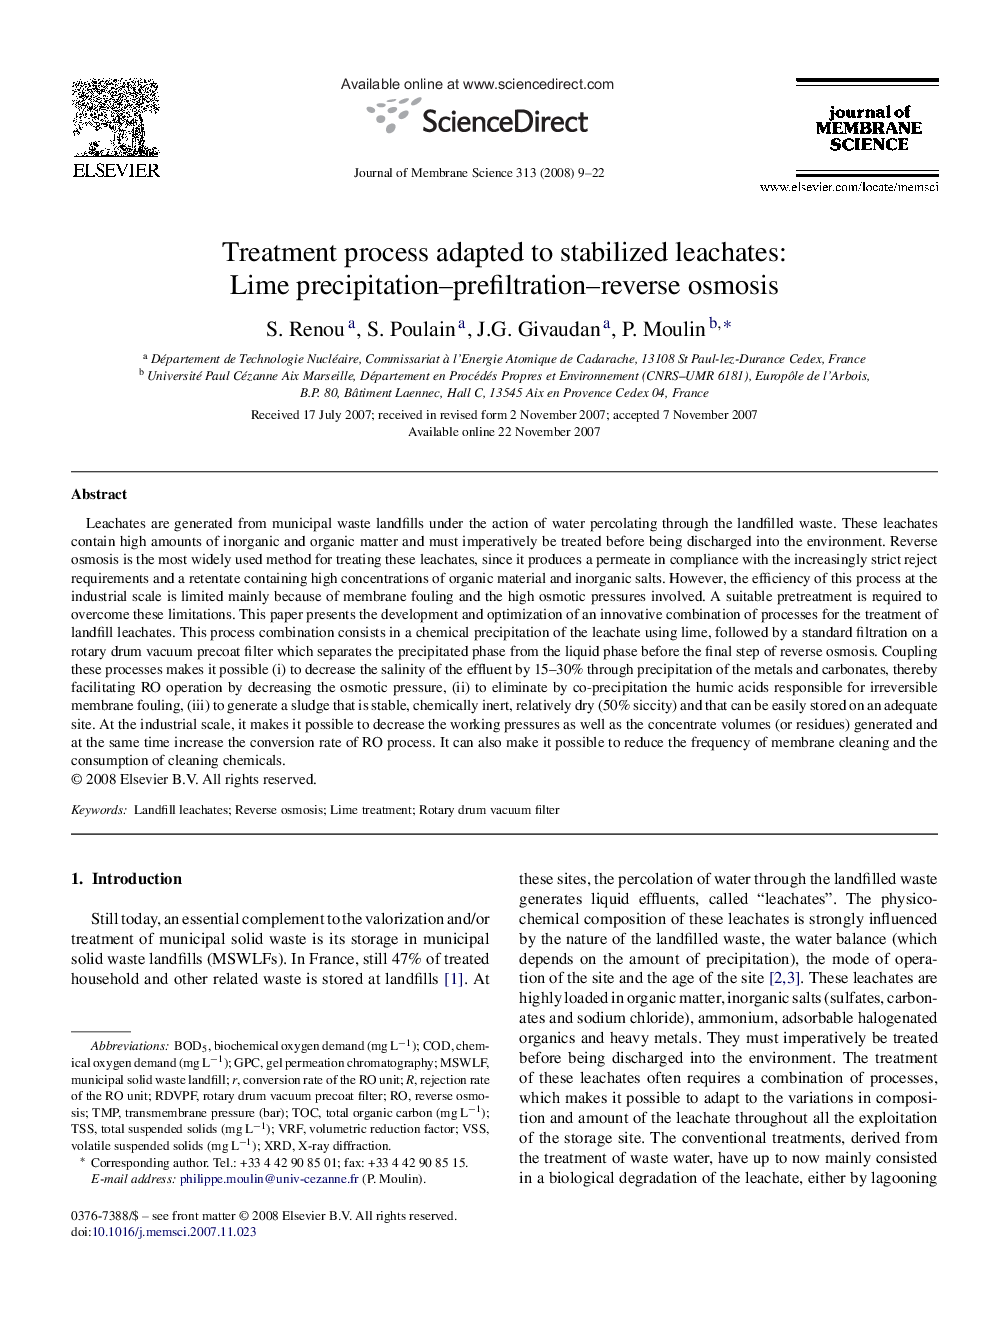 Treatment process adapted to stabilized leachates: Lime precipitation–prefiltration–reverse osmosis